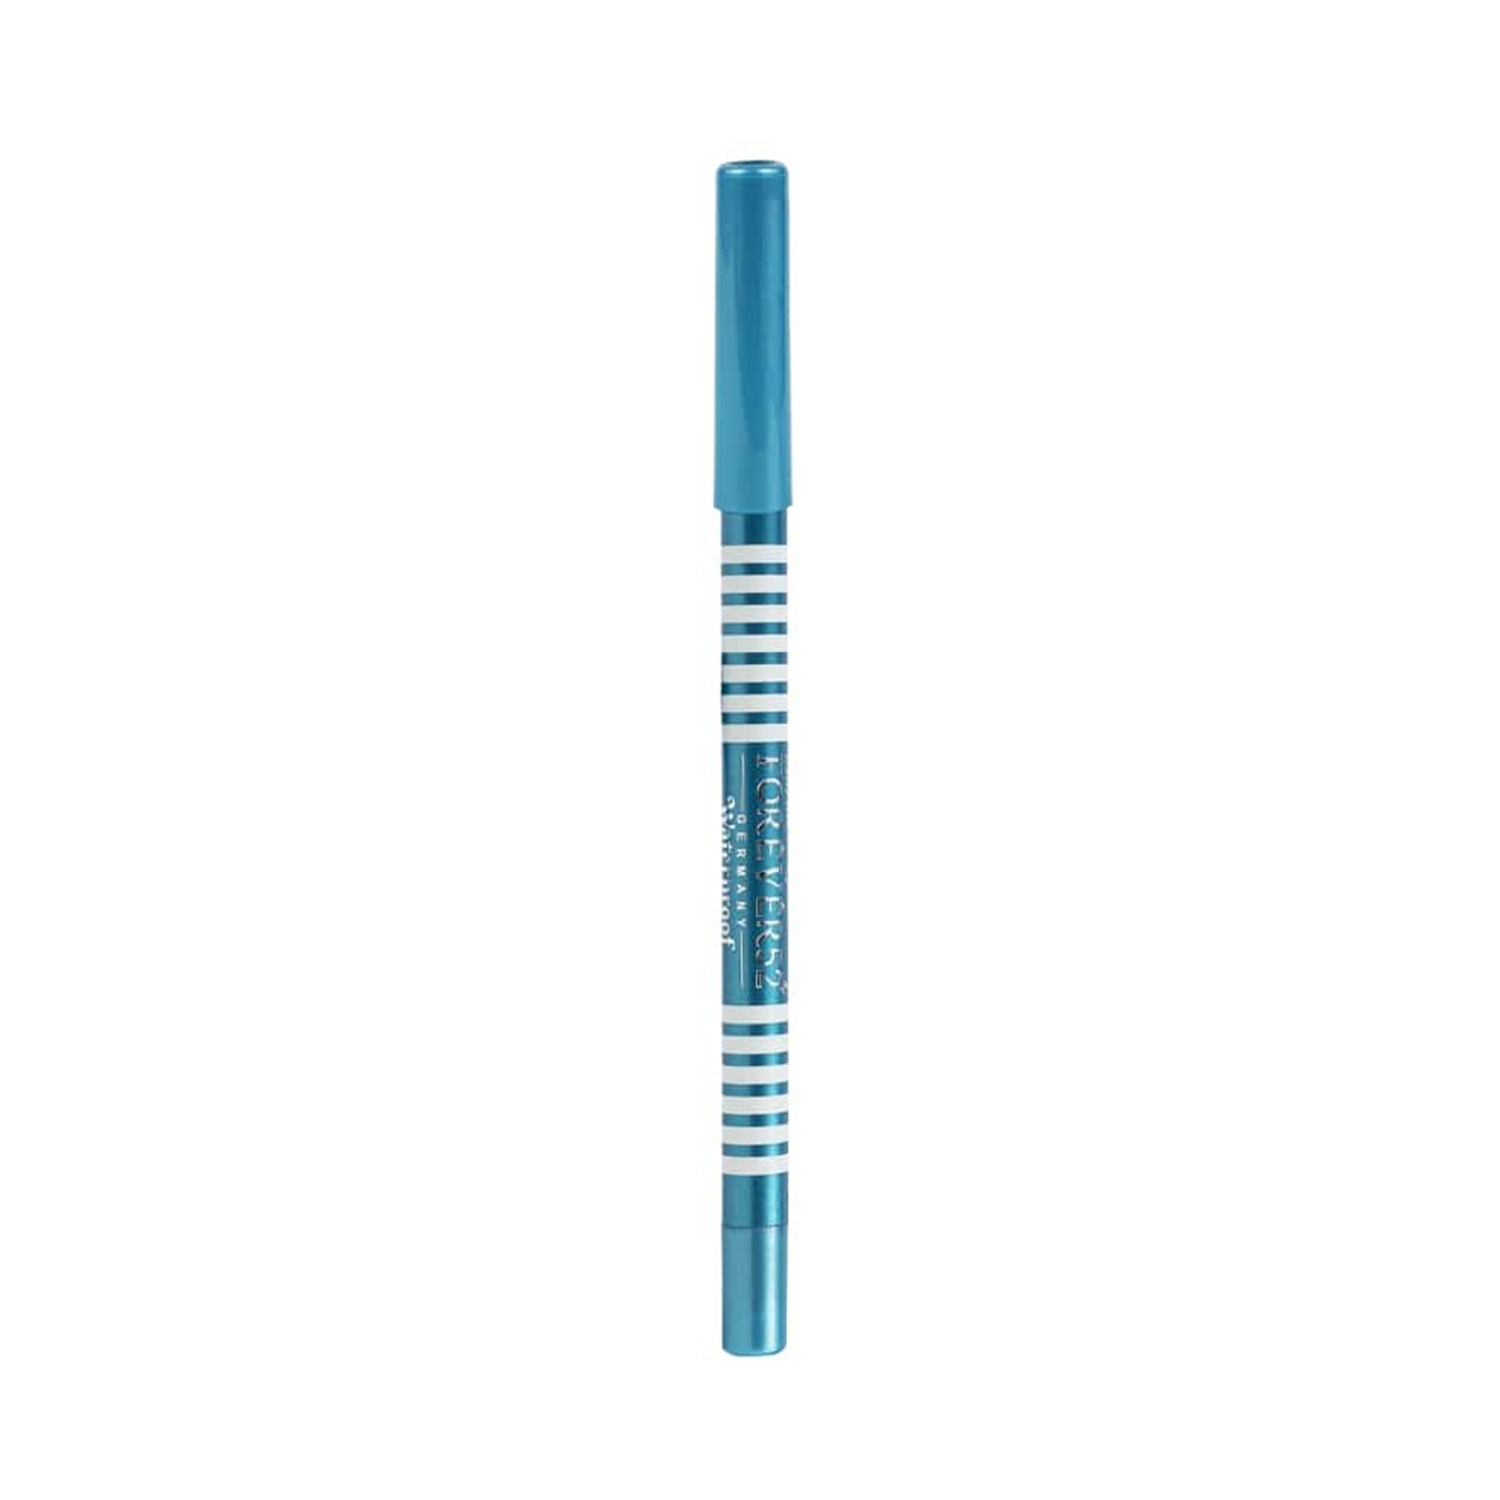 Daily Life Forever52 | Daily Life Forever52 Waterproof Smoothening Eye Pencil Sapphire F504 (1gm)